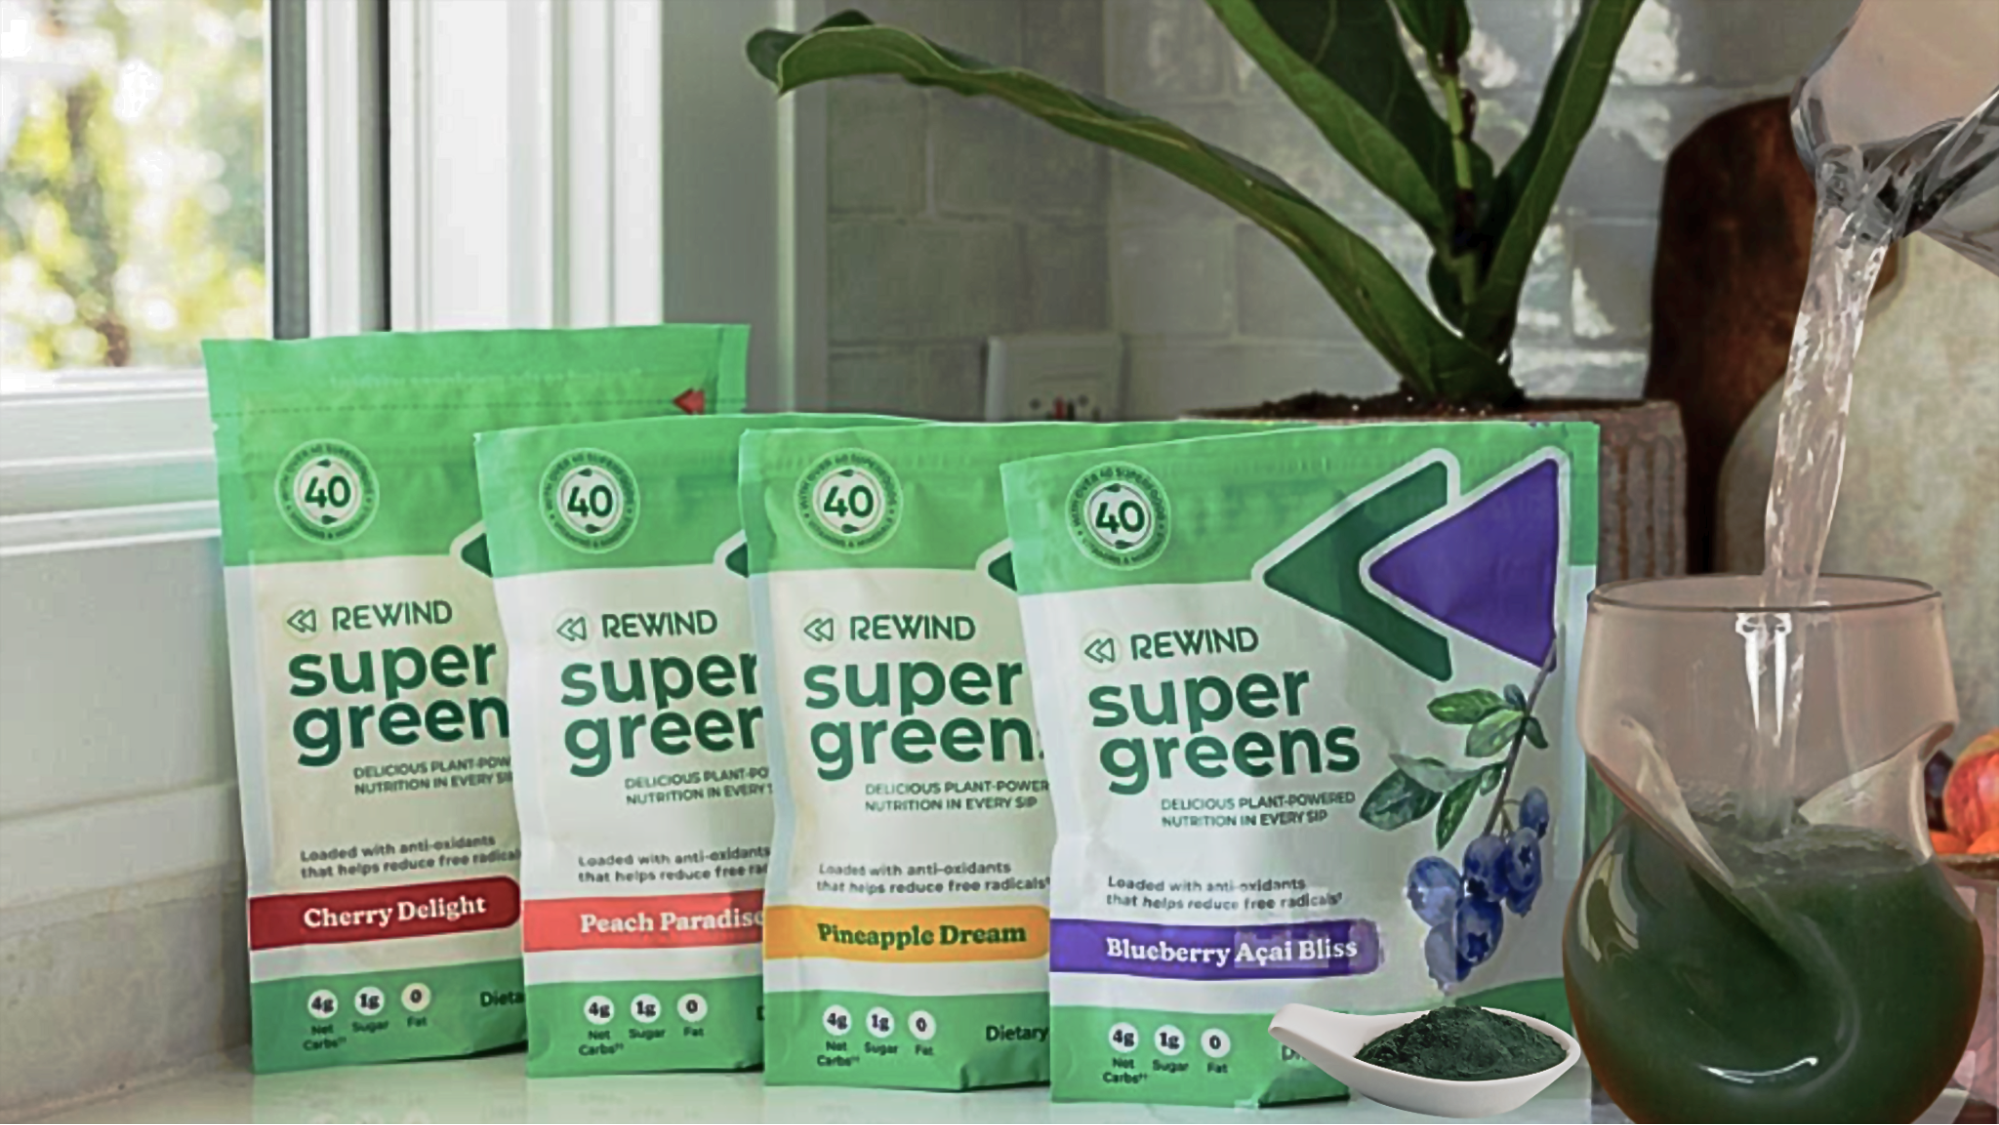 The four flavors of Rewind Greens supergreens powder are lined up on a kitchen counter with a pitcher pouring water into a glass filled with the green powder.